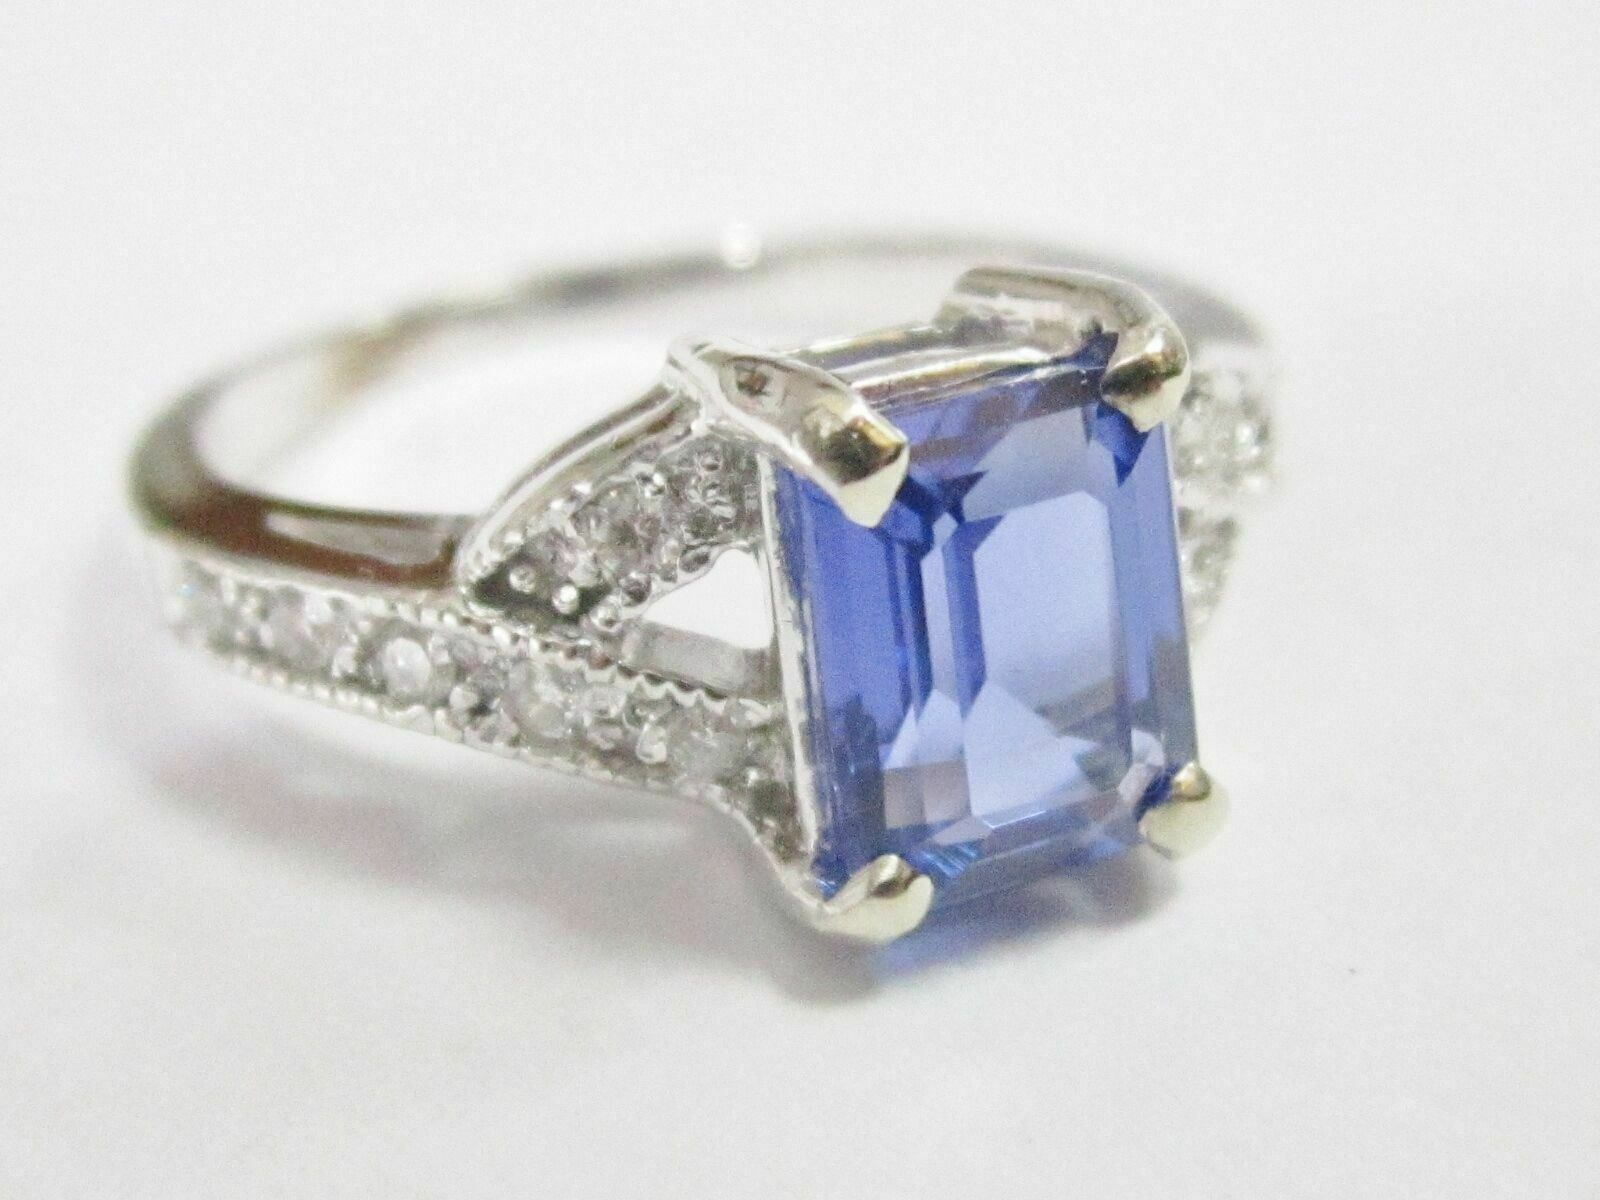 1.91 TCW Natural Radiant Tanzanite & Diamond Accents Solitaire Ring Size 6.5 14k